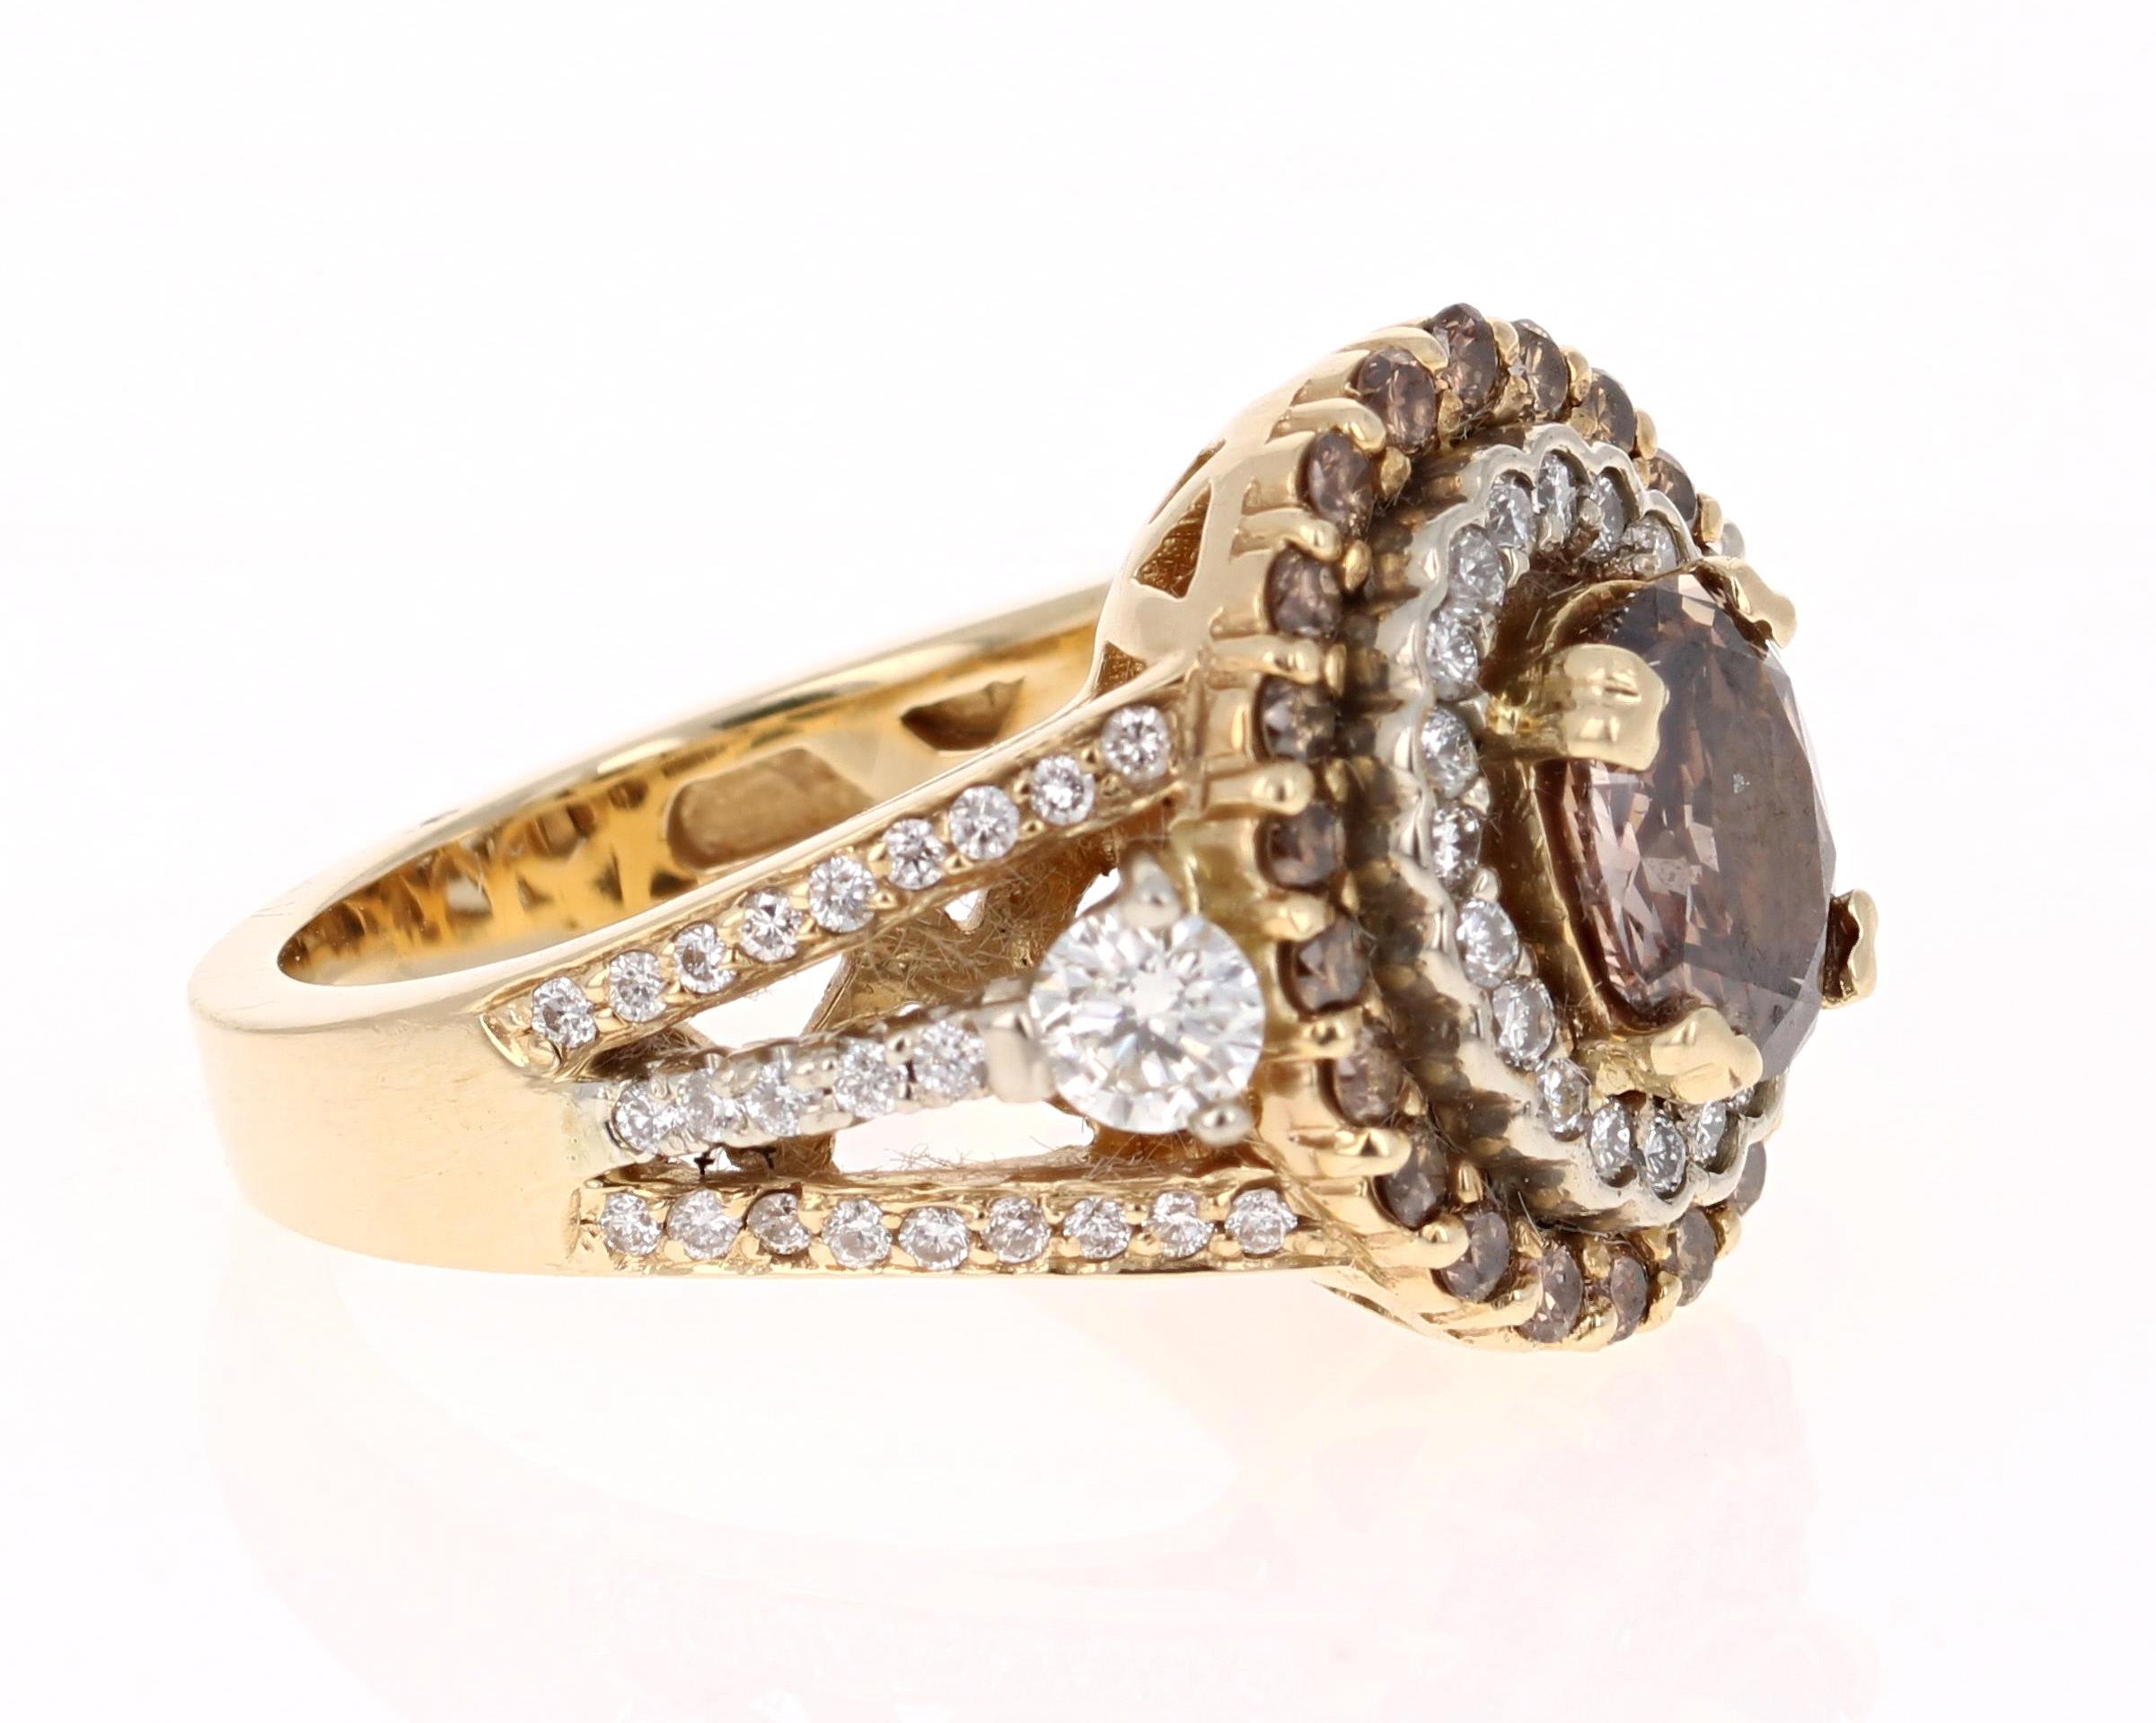 This beauty has a deep Brown/Champagne colored natural Oval Cut Diamond that weighs 1.03 Carats. It is surrounded by 46 Round Cut Diamonds that weigh 0.43 Carats. The clarity and color of the diamonds are VS-I. There are also 22 Brown Round Cut